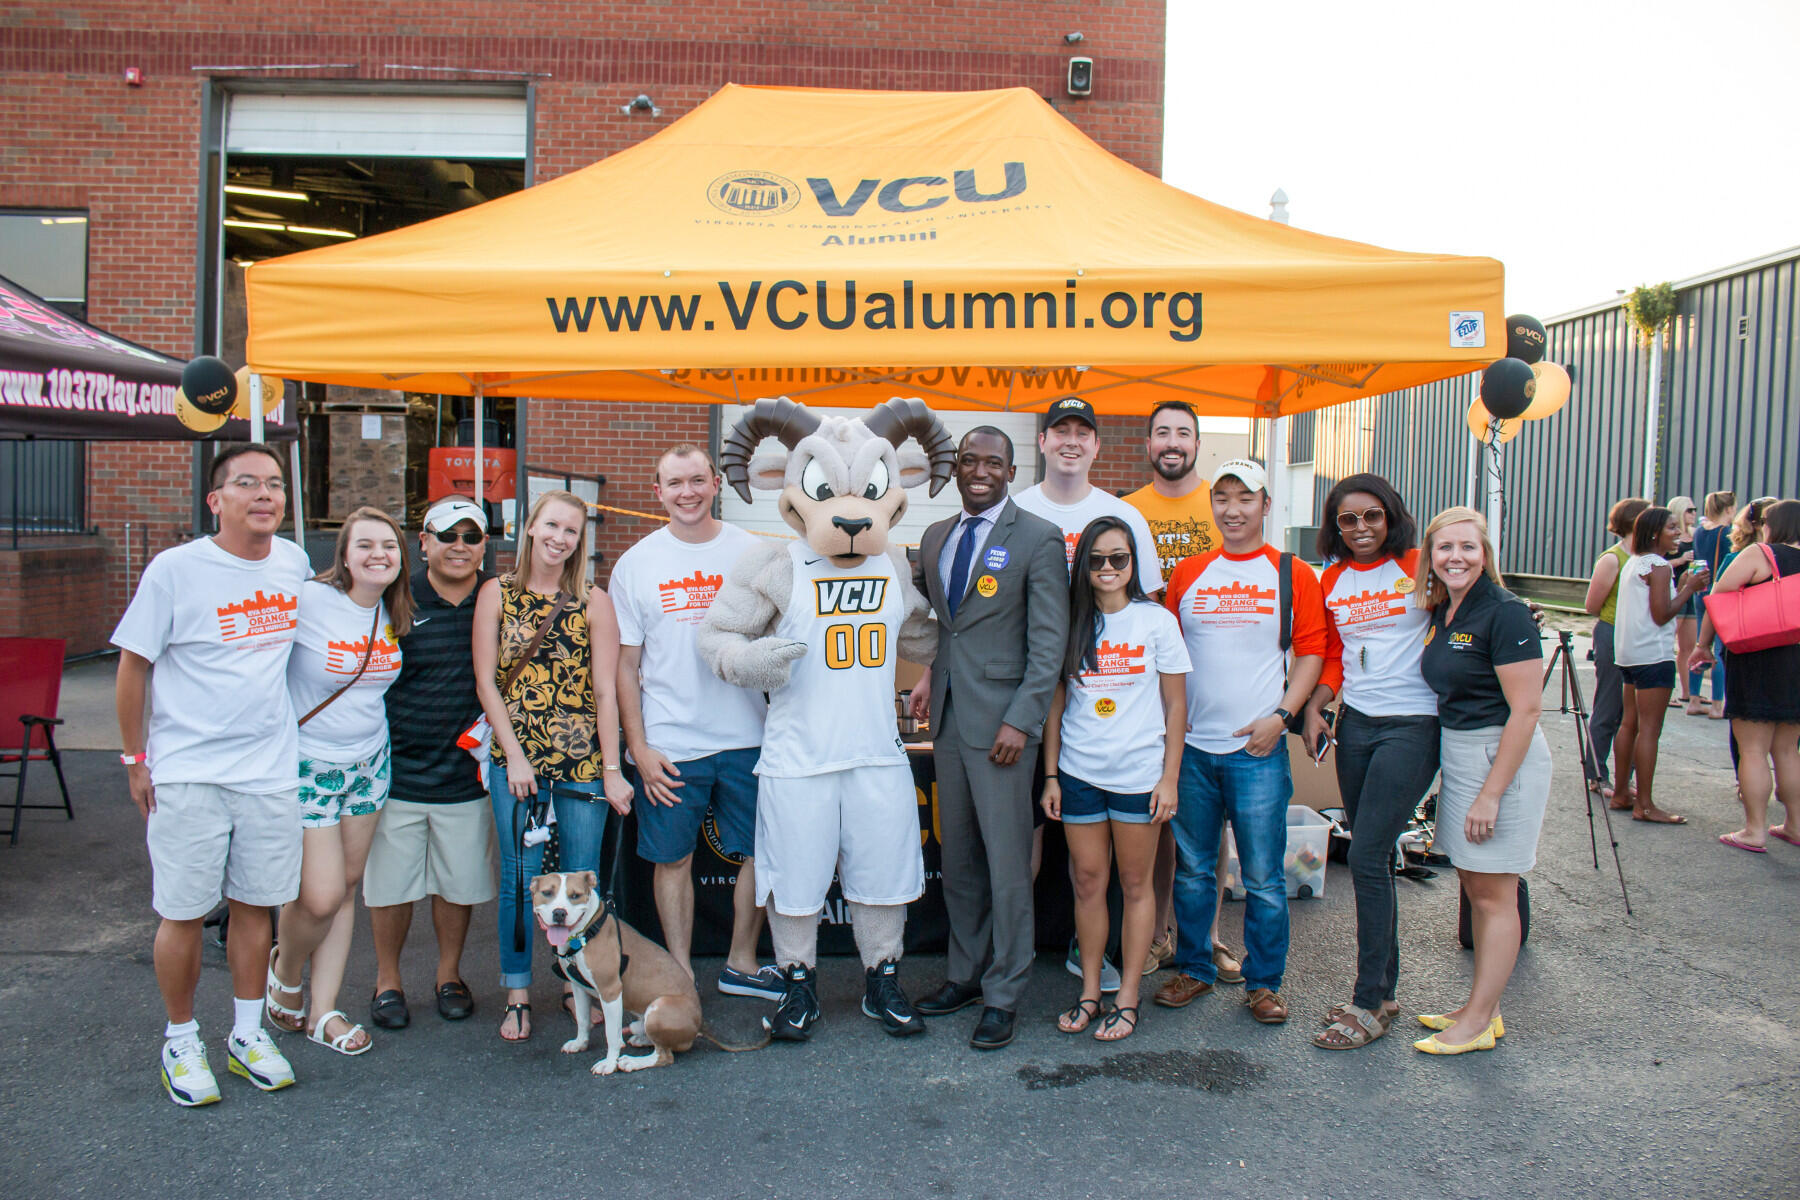 Richmond Mayor Levar Stoney, center, and VCU alumni pose for a photo at last year's charity challenge. (Courtesy photo)